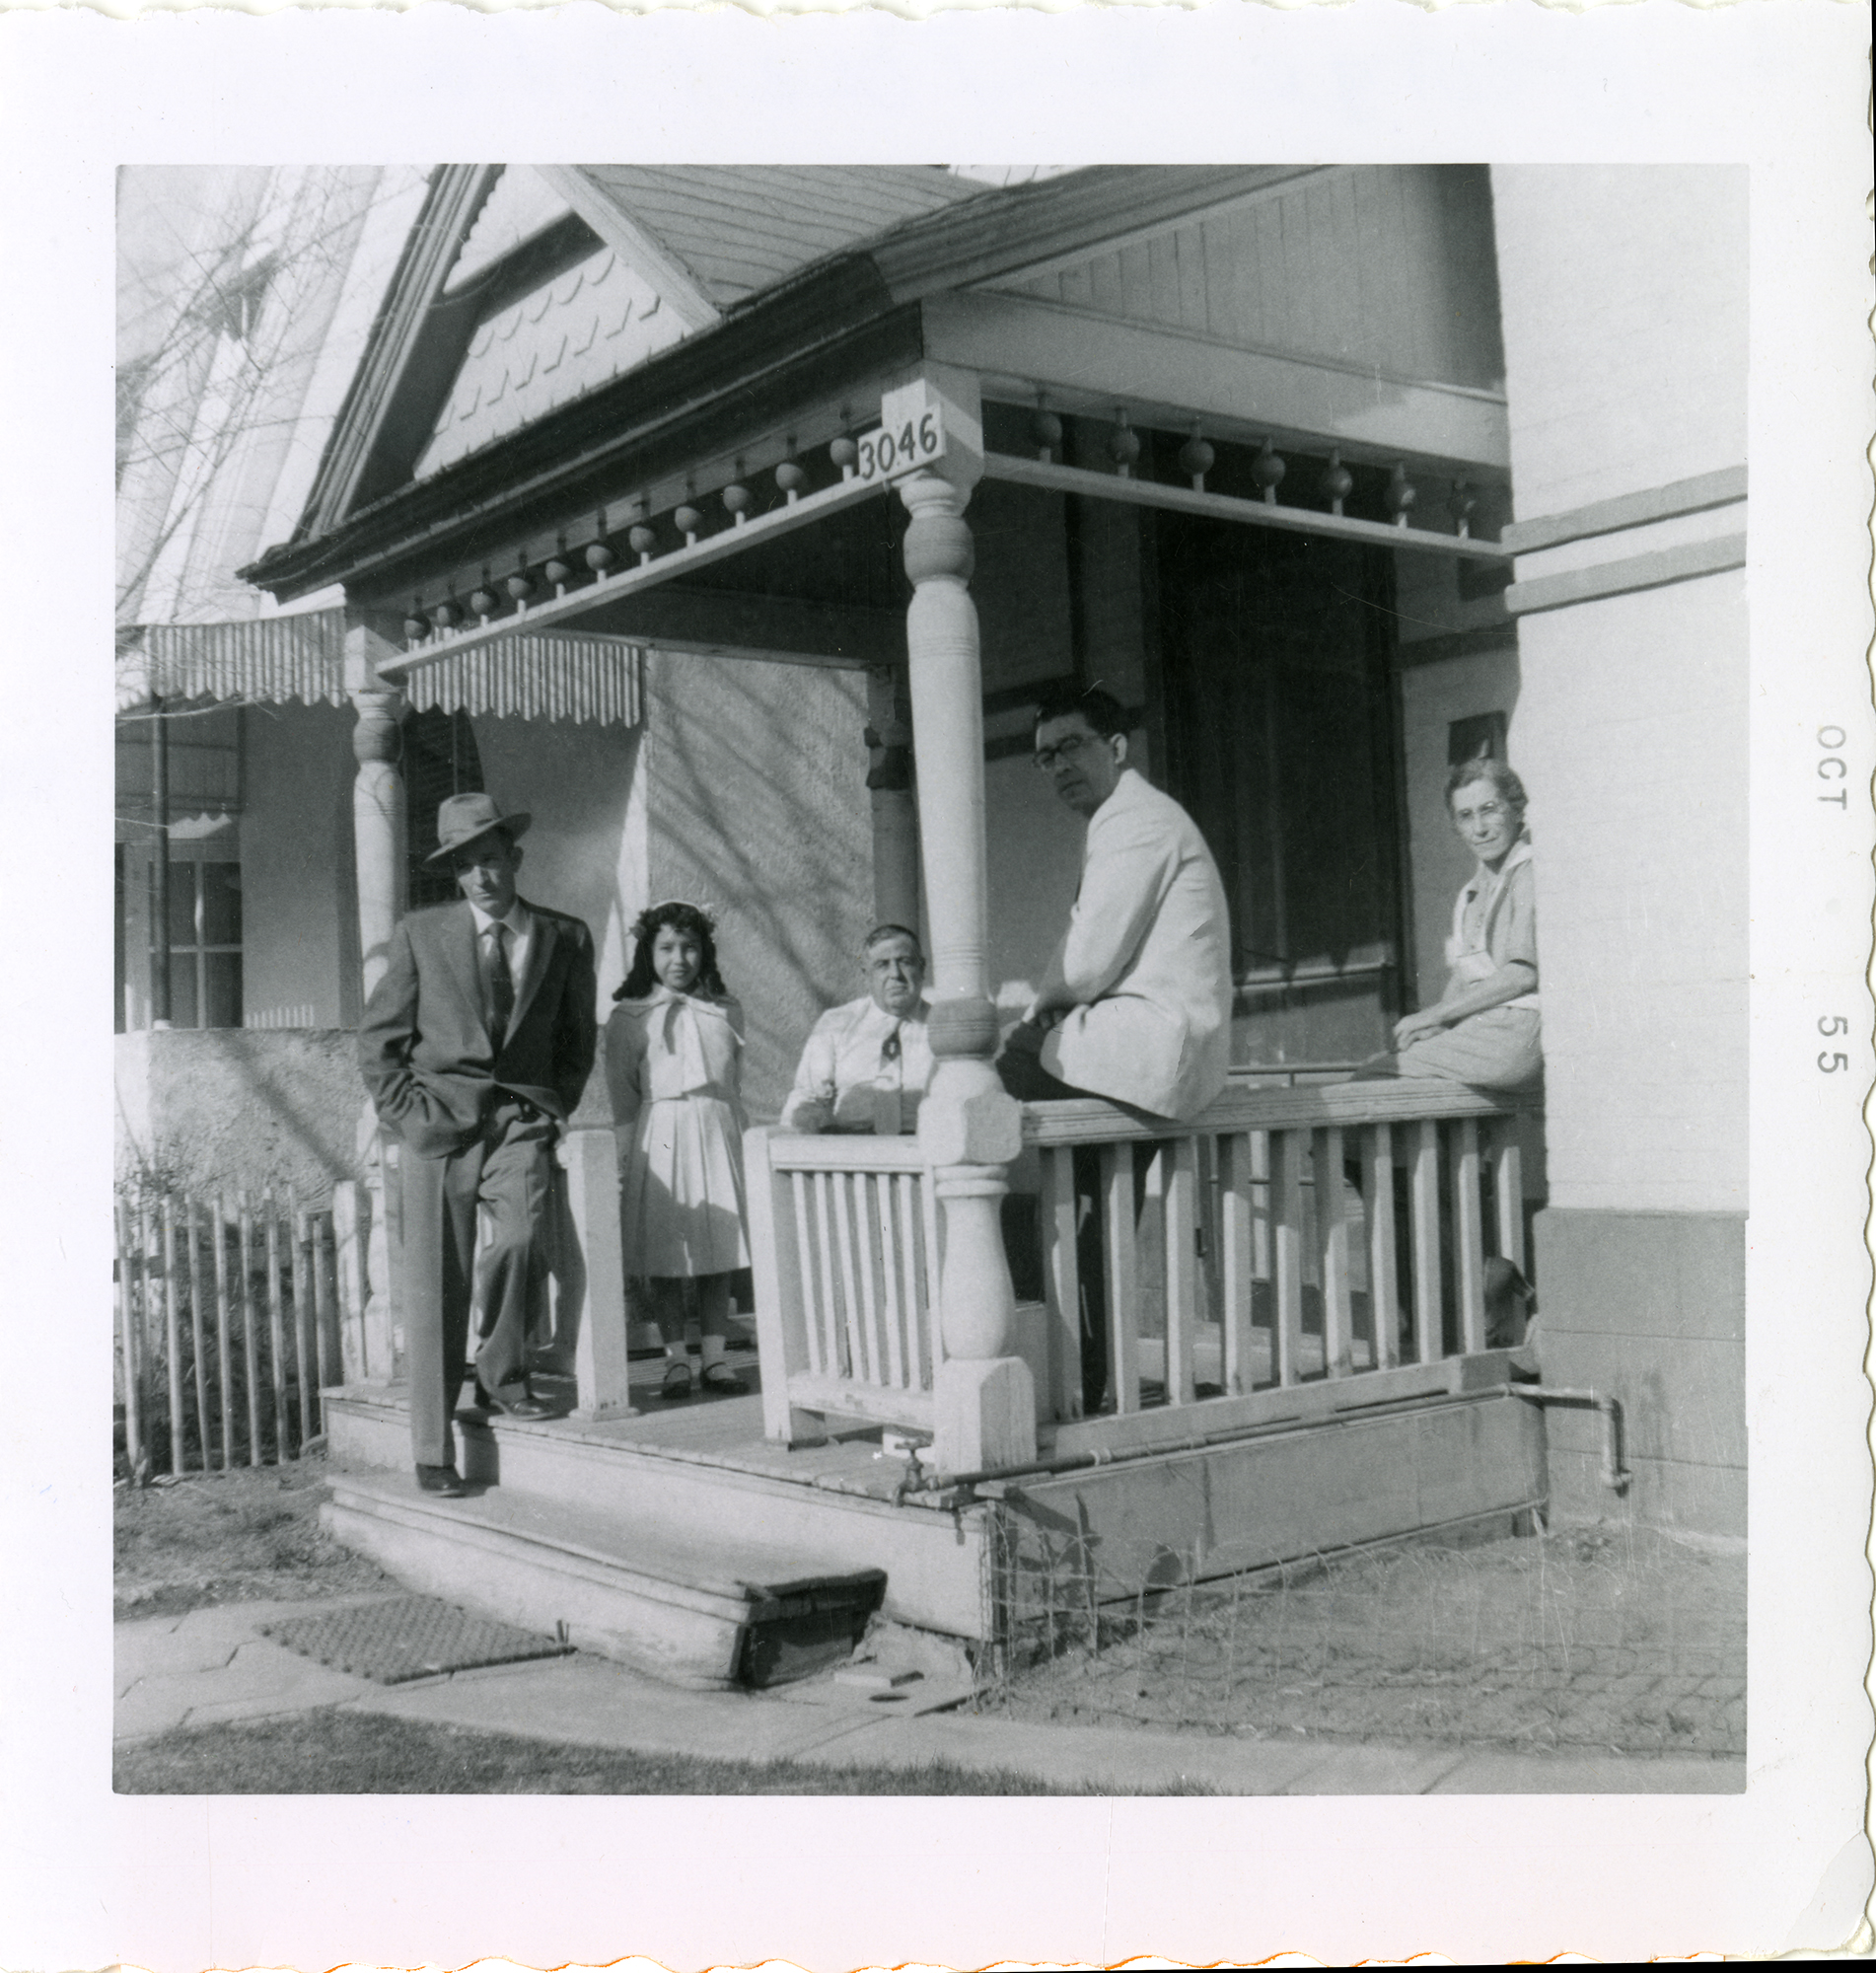 Black and white photograph of members of the Lucero, Trujillo, and Gonzales families sitting and talking on a porch in the Five Points area of Denver, Colorado.